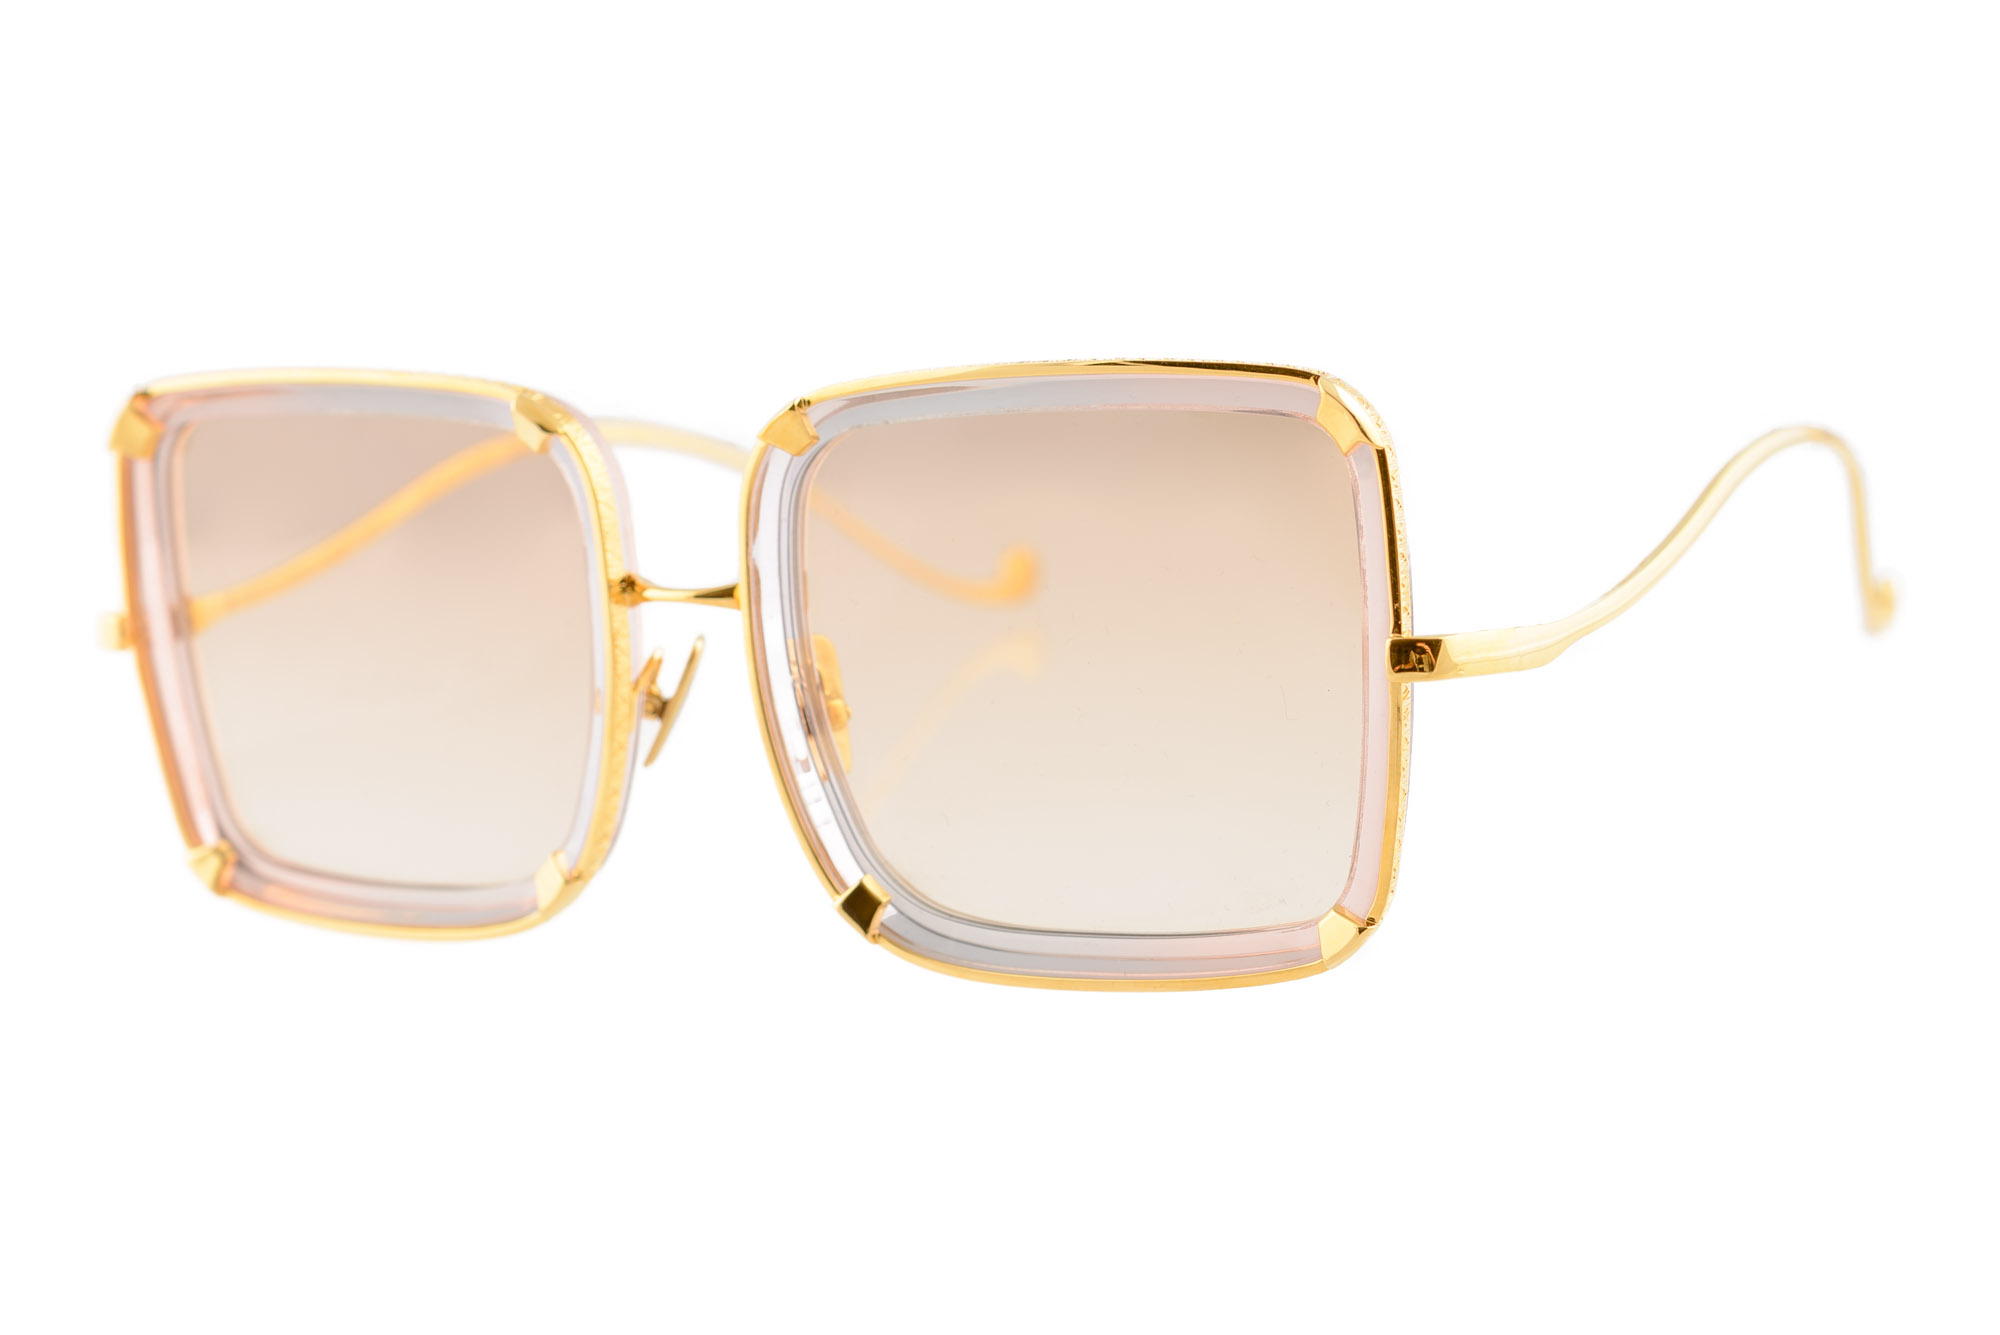 Anna-Karin Karlsson White Moon Black Limited 1st Edition Sunglasses and Gold 56mm